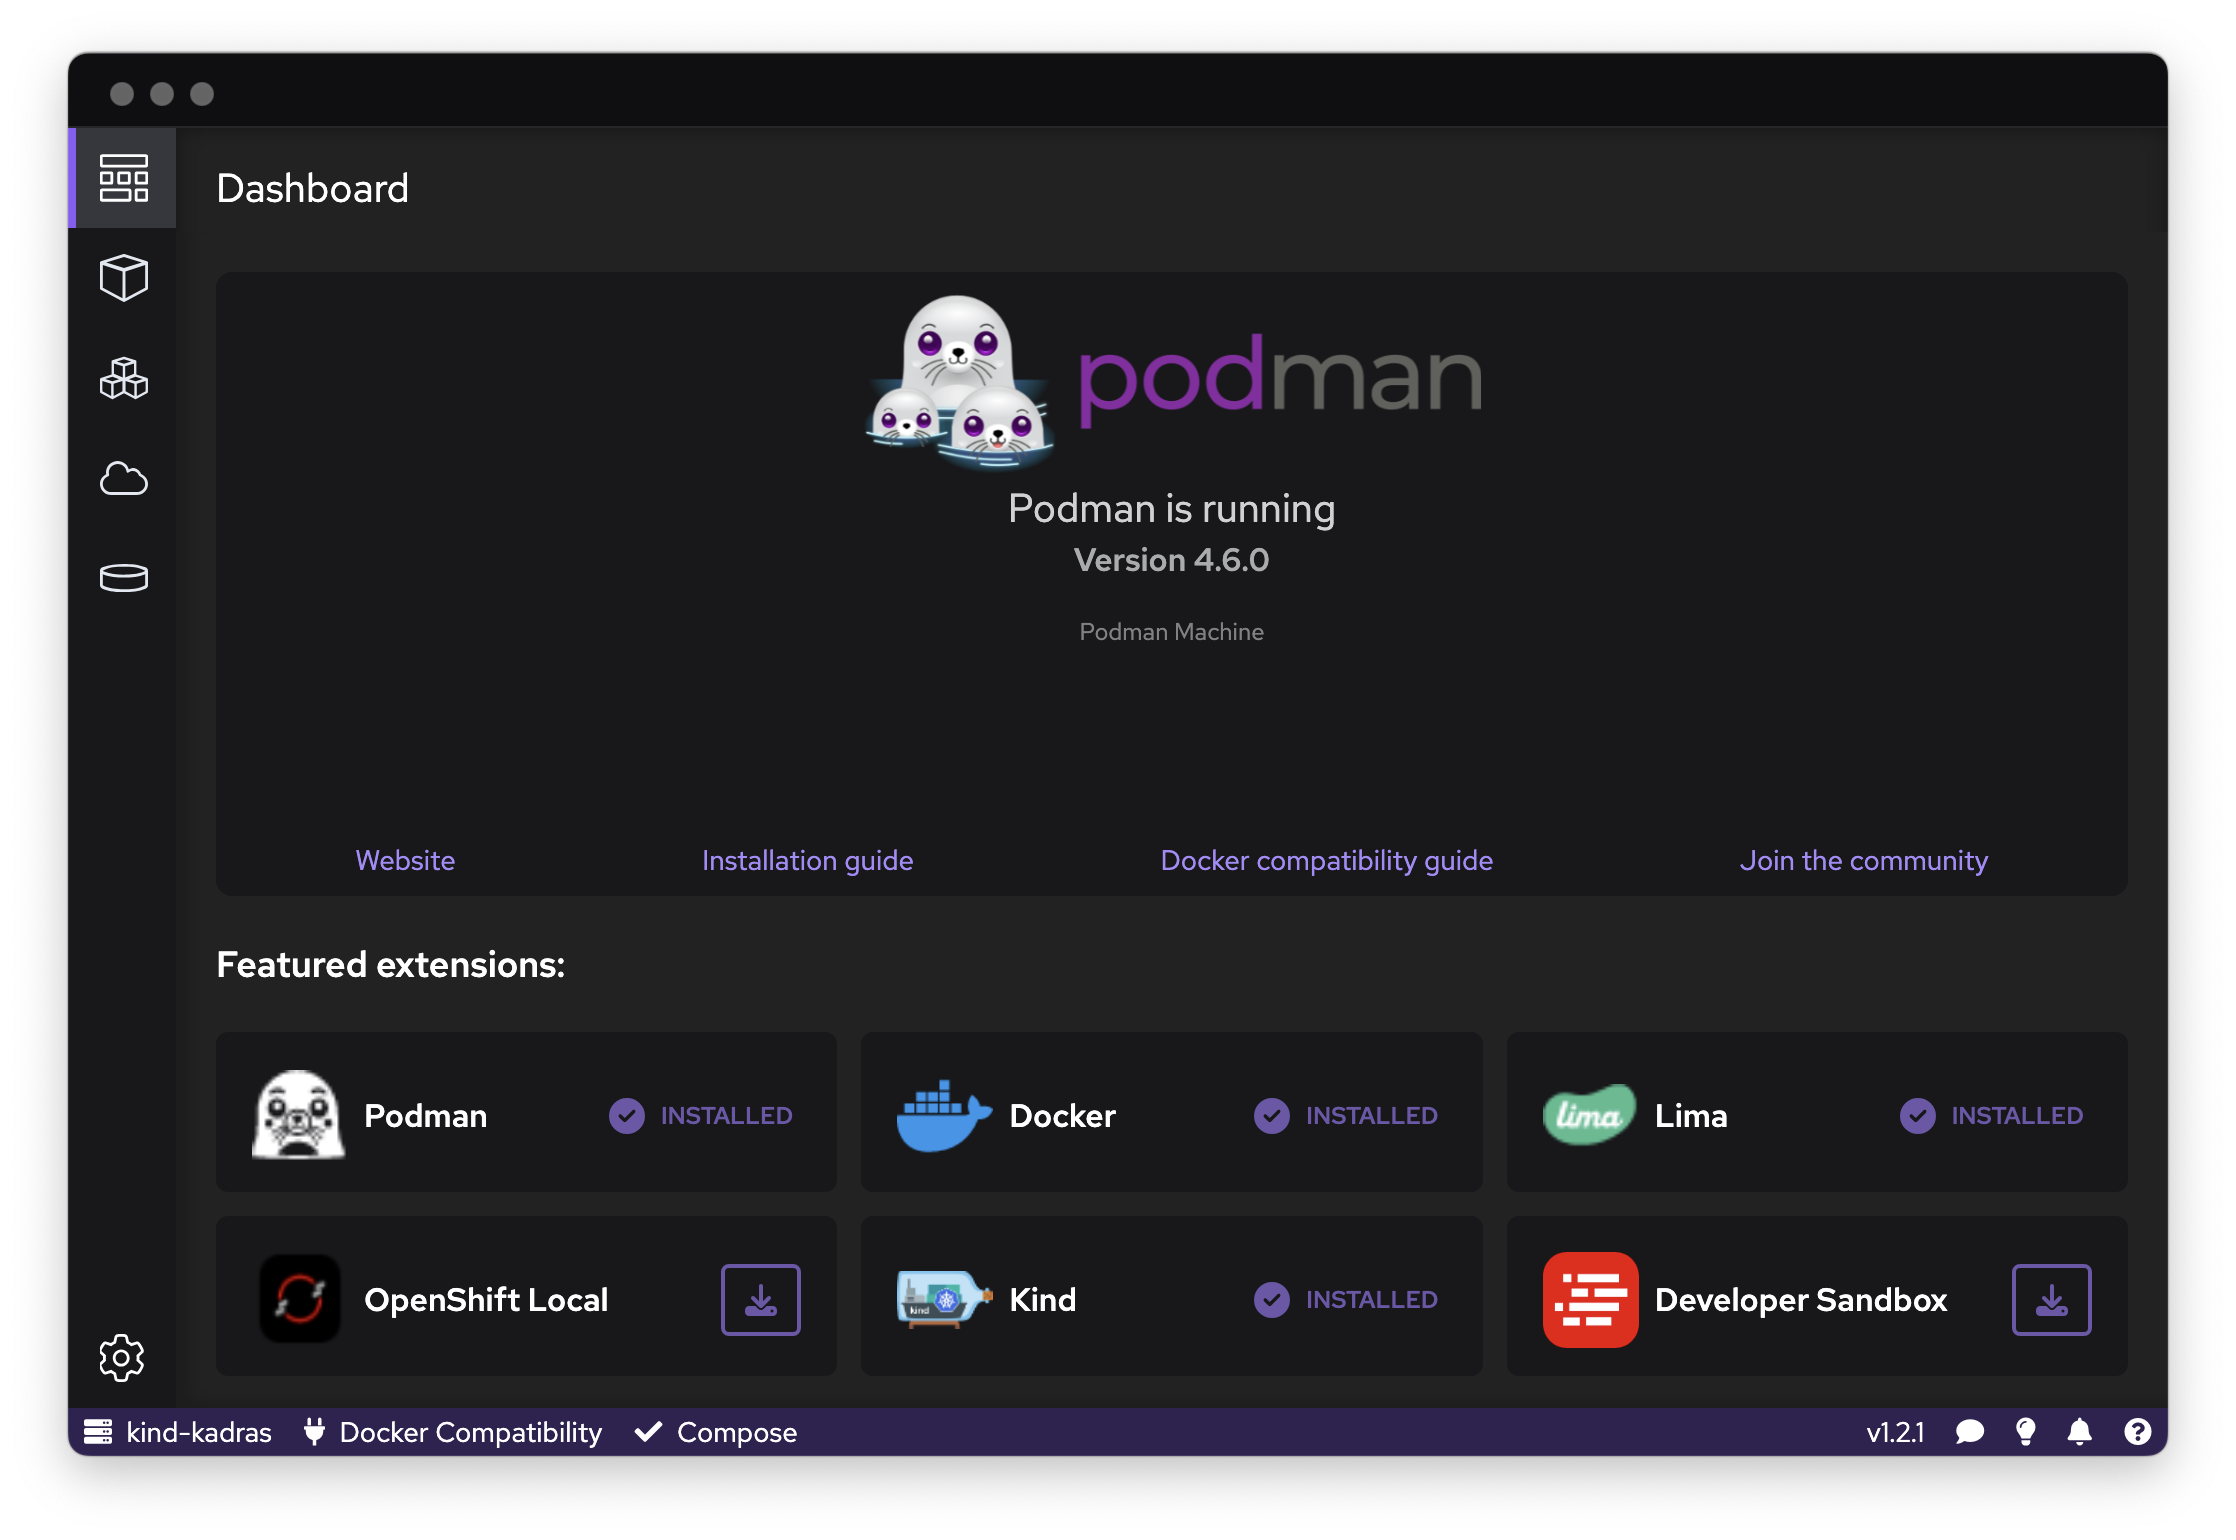 The main Podman Desktop dashboard showing that Podman is running. It also shows the status of featured extensions like OpenShift Local and Kind.